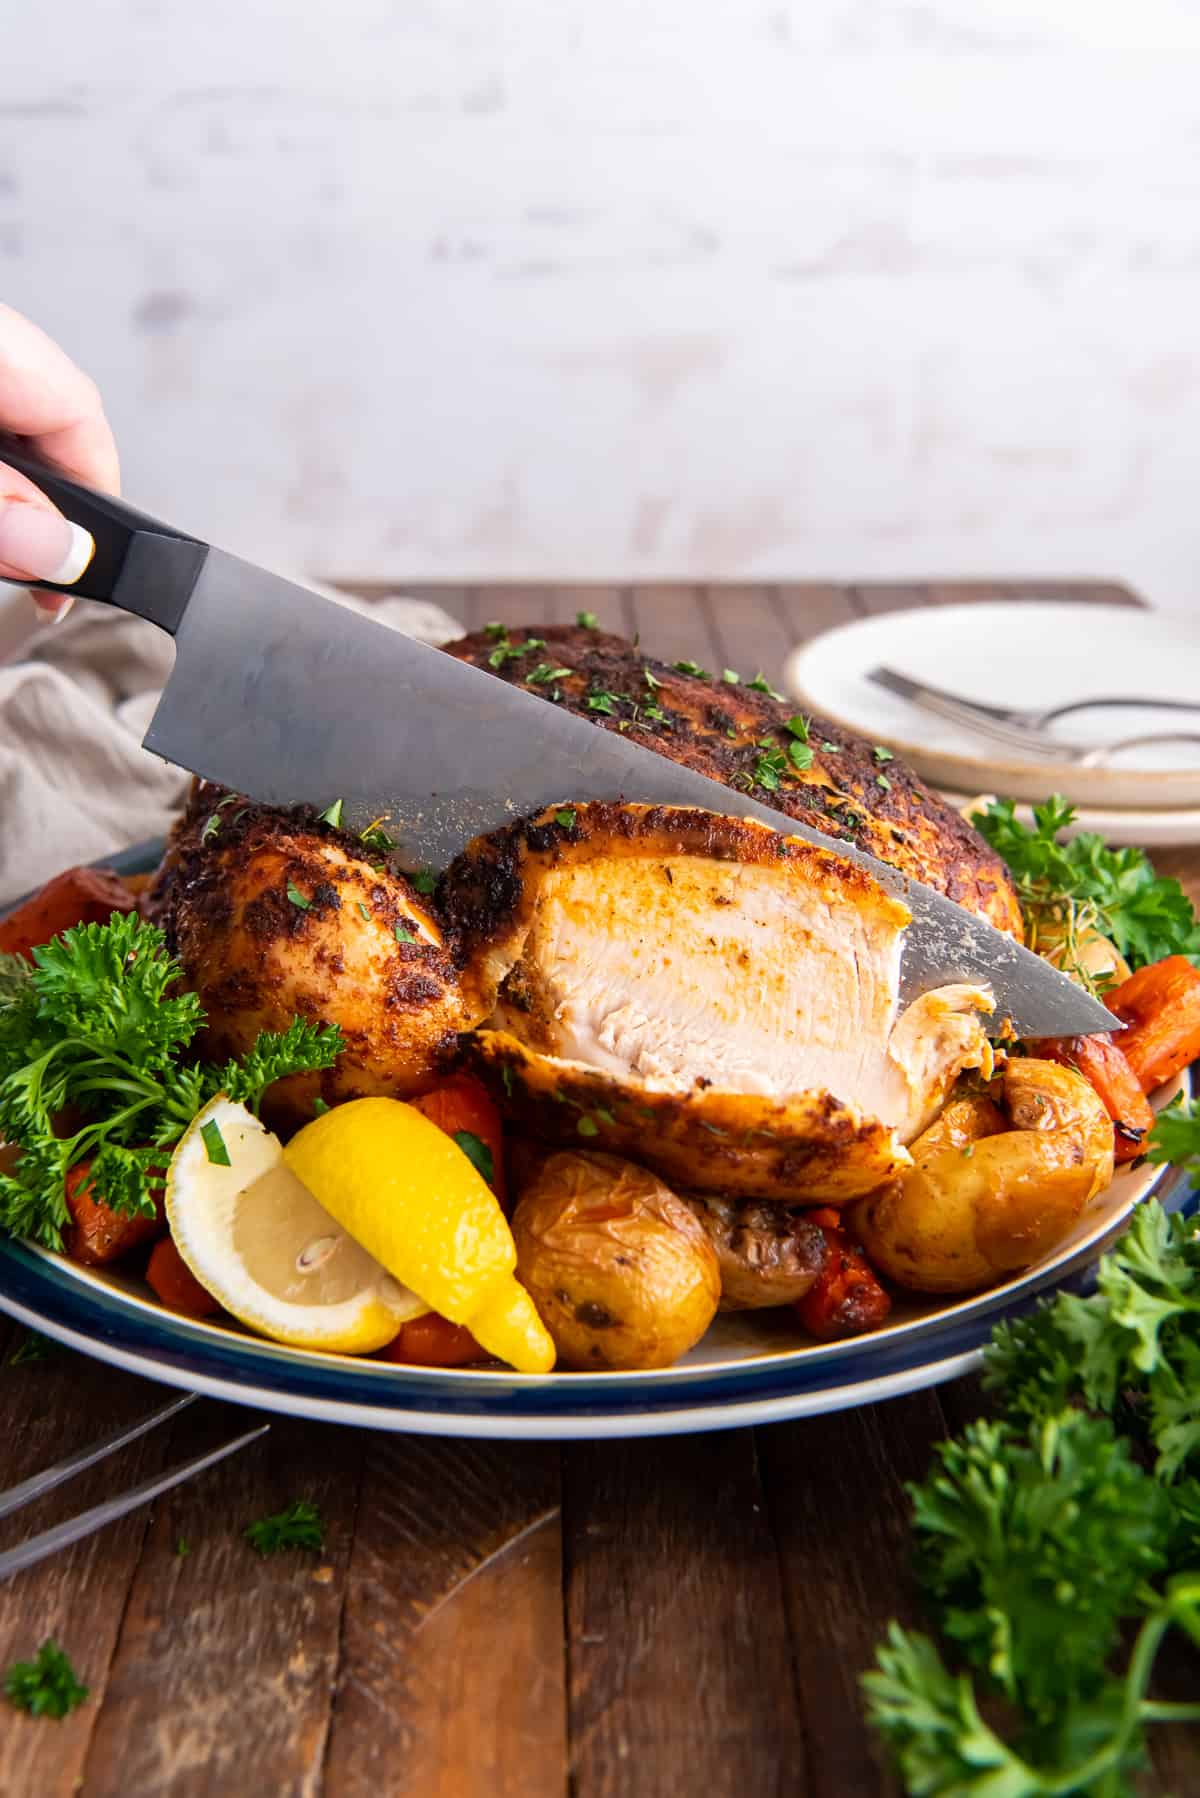 A knife slices into the breast meat of a whole roasted chicken.